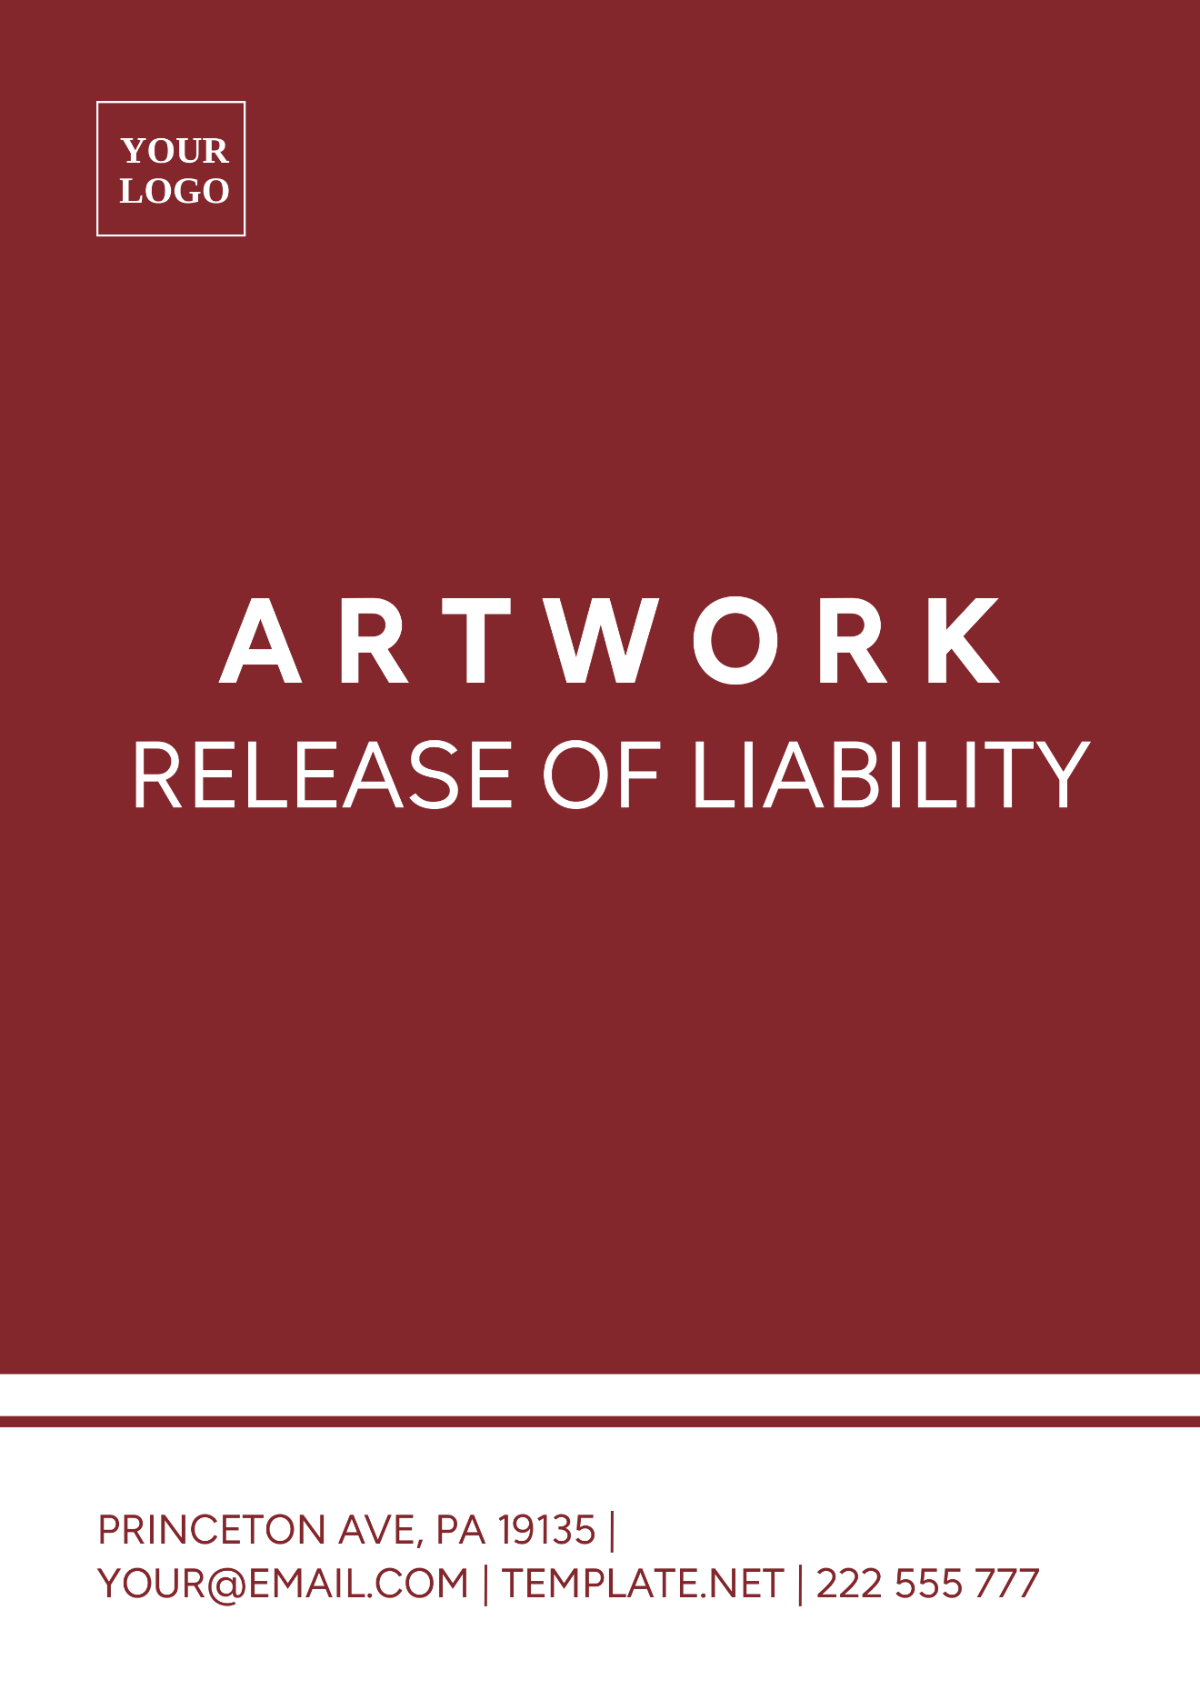 Free Artwork Release of Liability Template